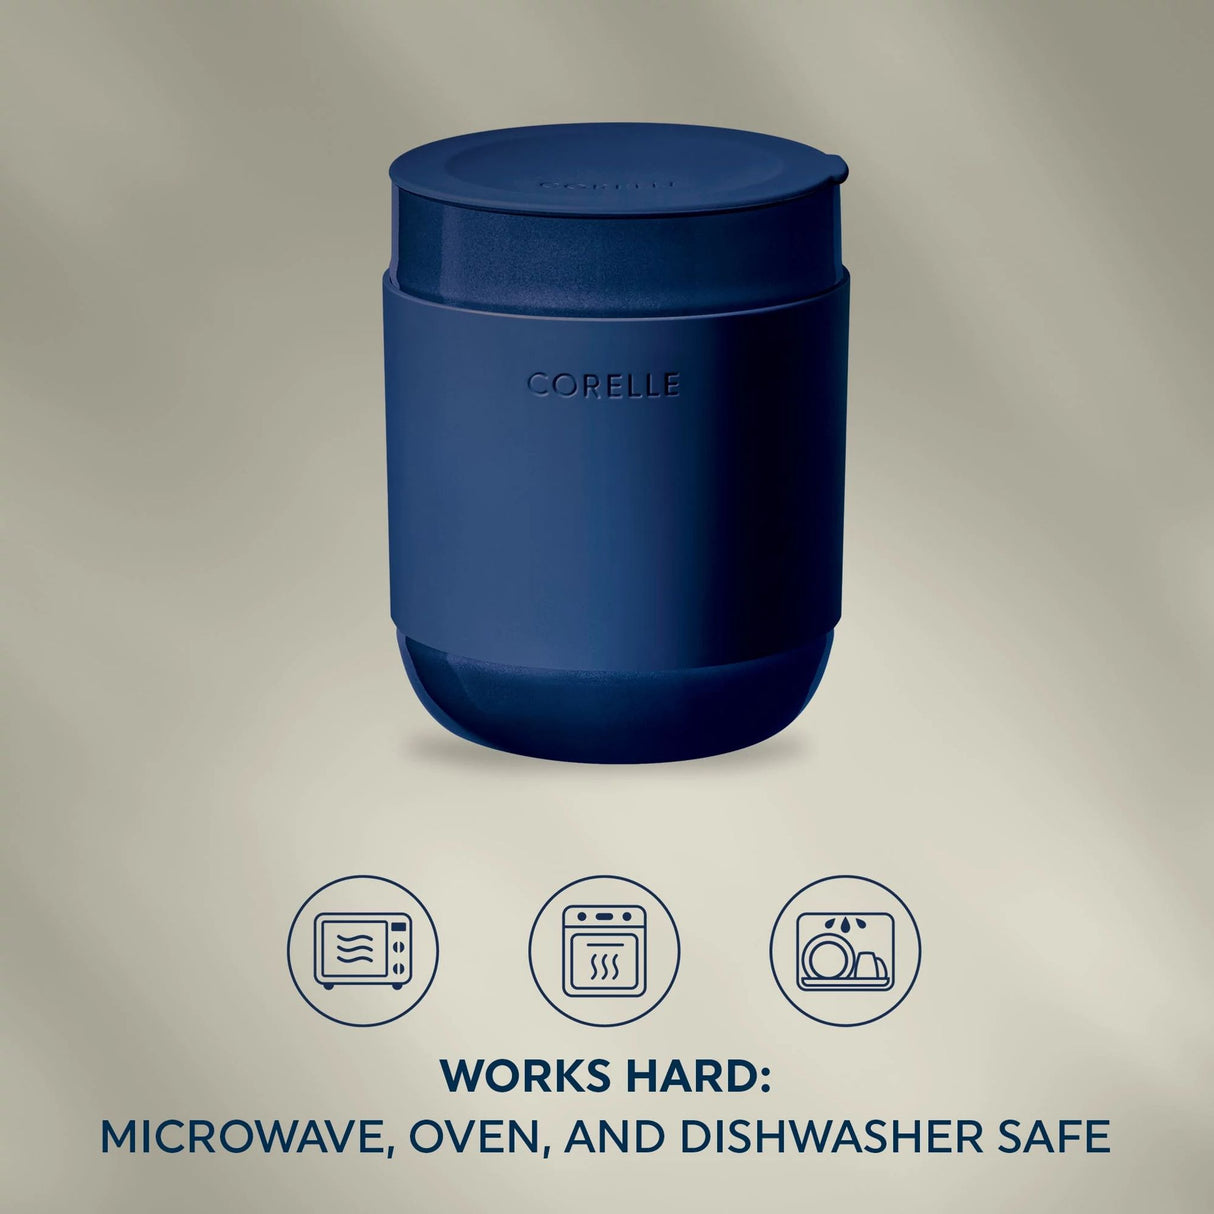  Text that says: Works hard: Microwave, oven and dishwasher safe